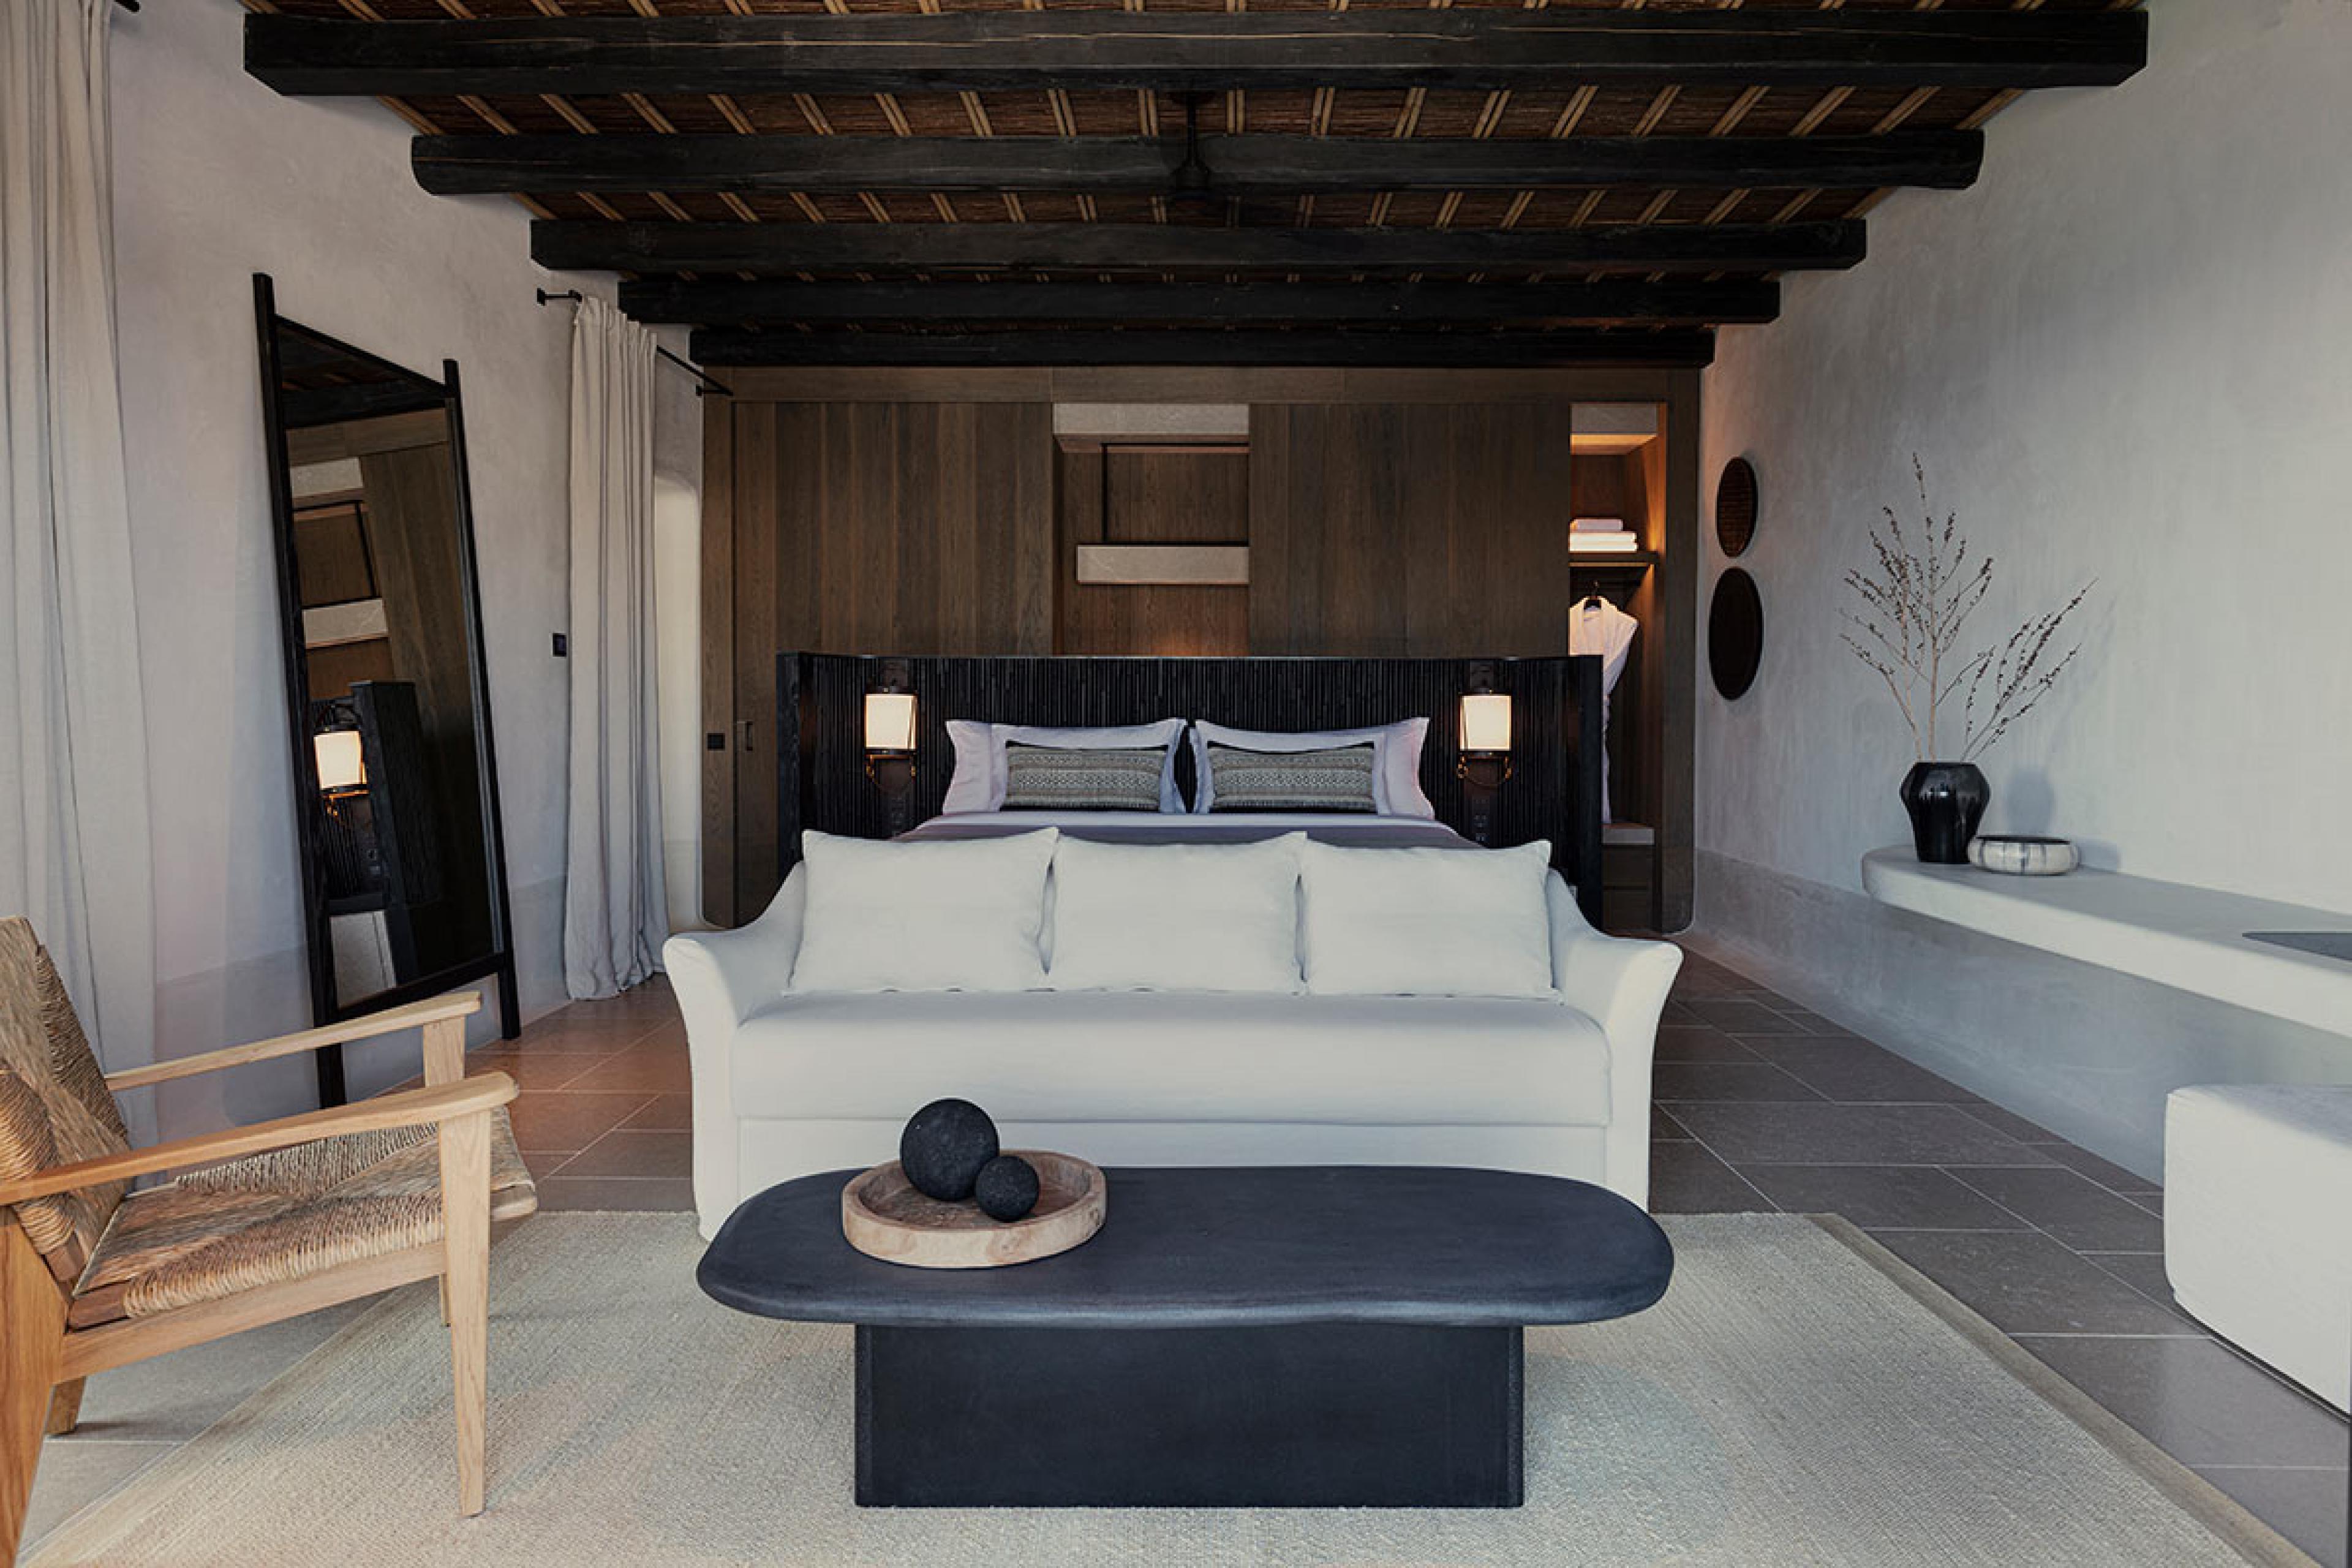 Kalesma Mykonos Suite  with couch at the foot of bed and large black stone coffee table